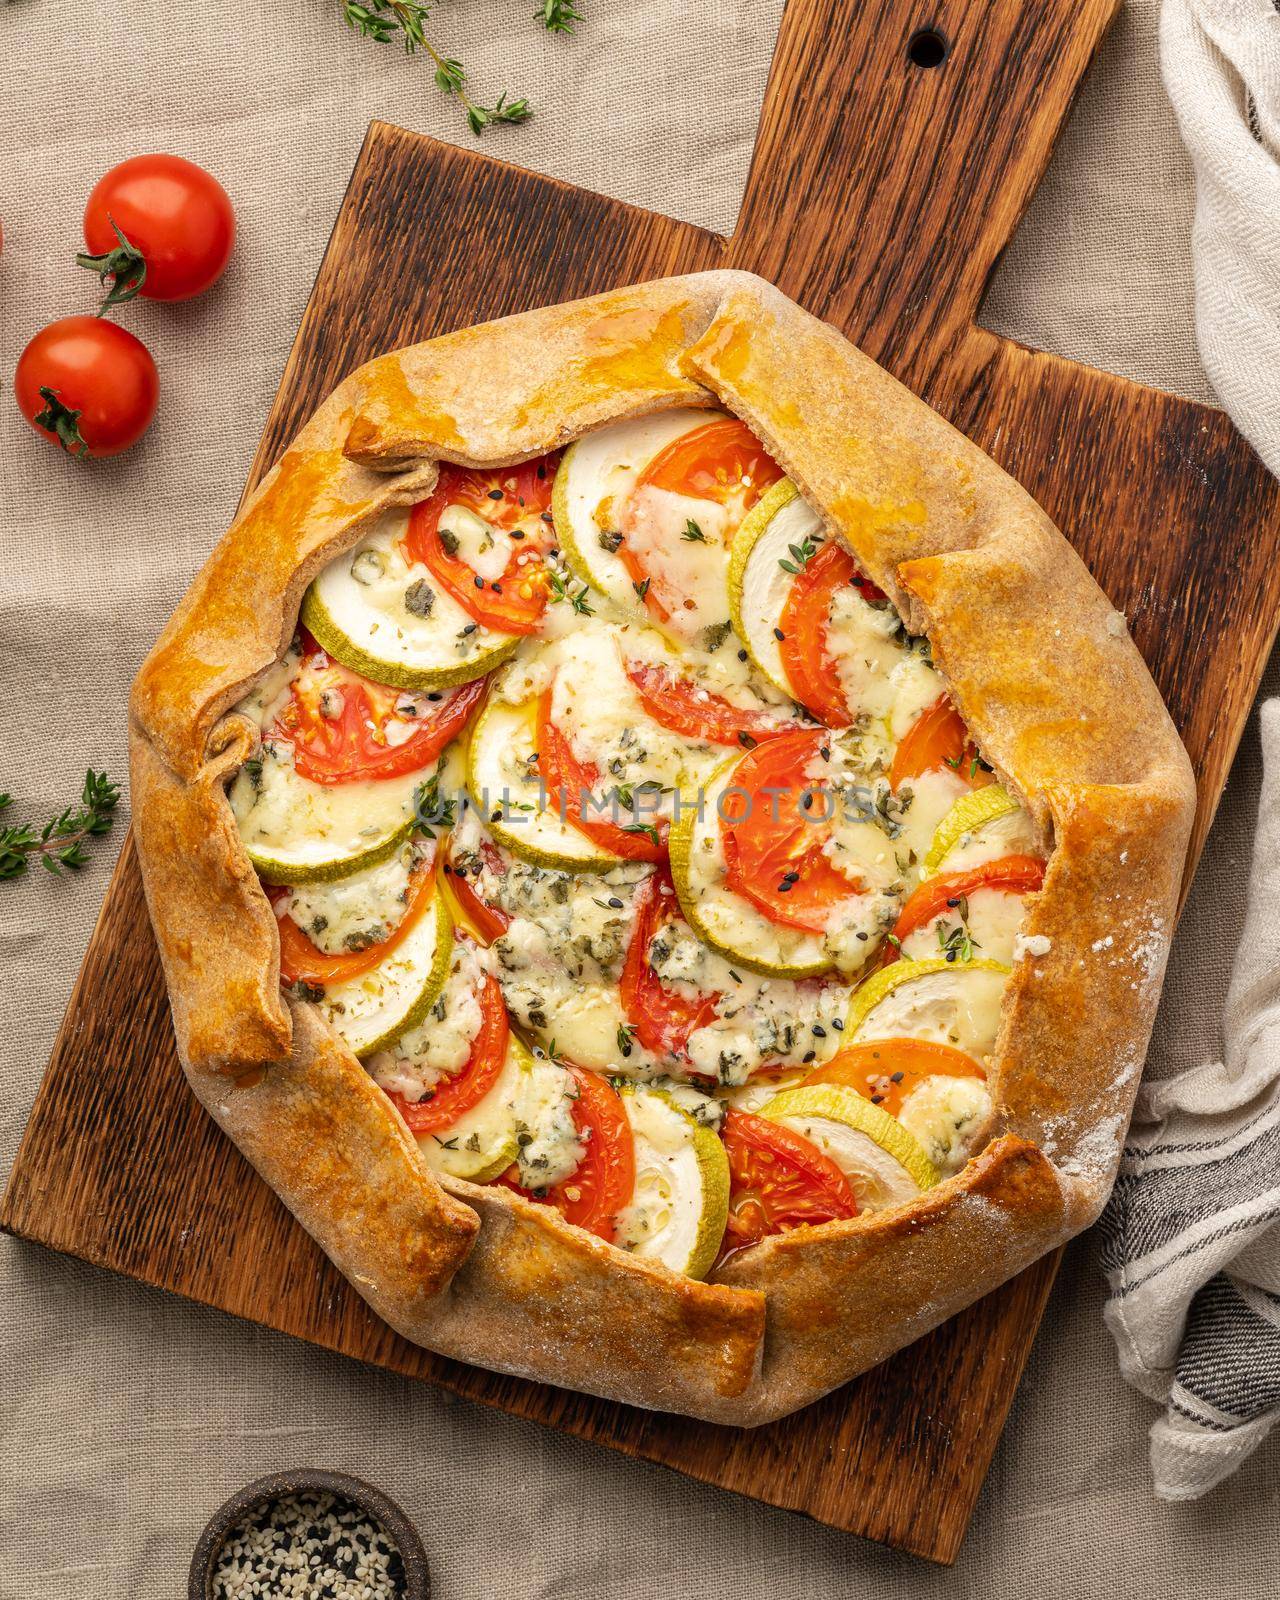 Homemade savory galette with vegetables, wheat pie with tomatoes, zucchini, vertical by NataBene